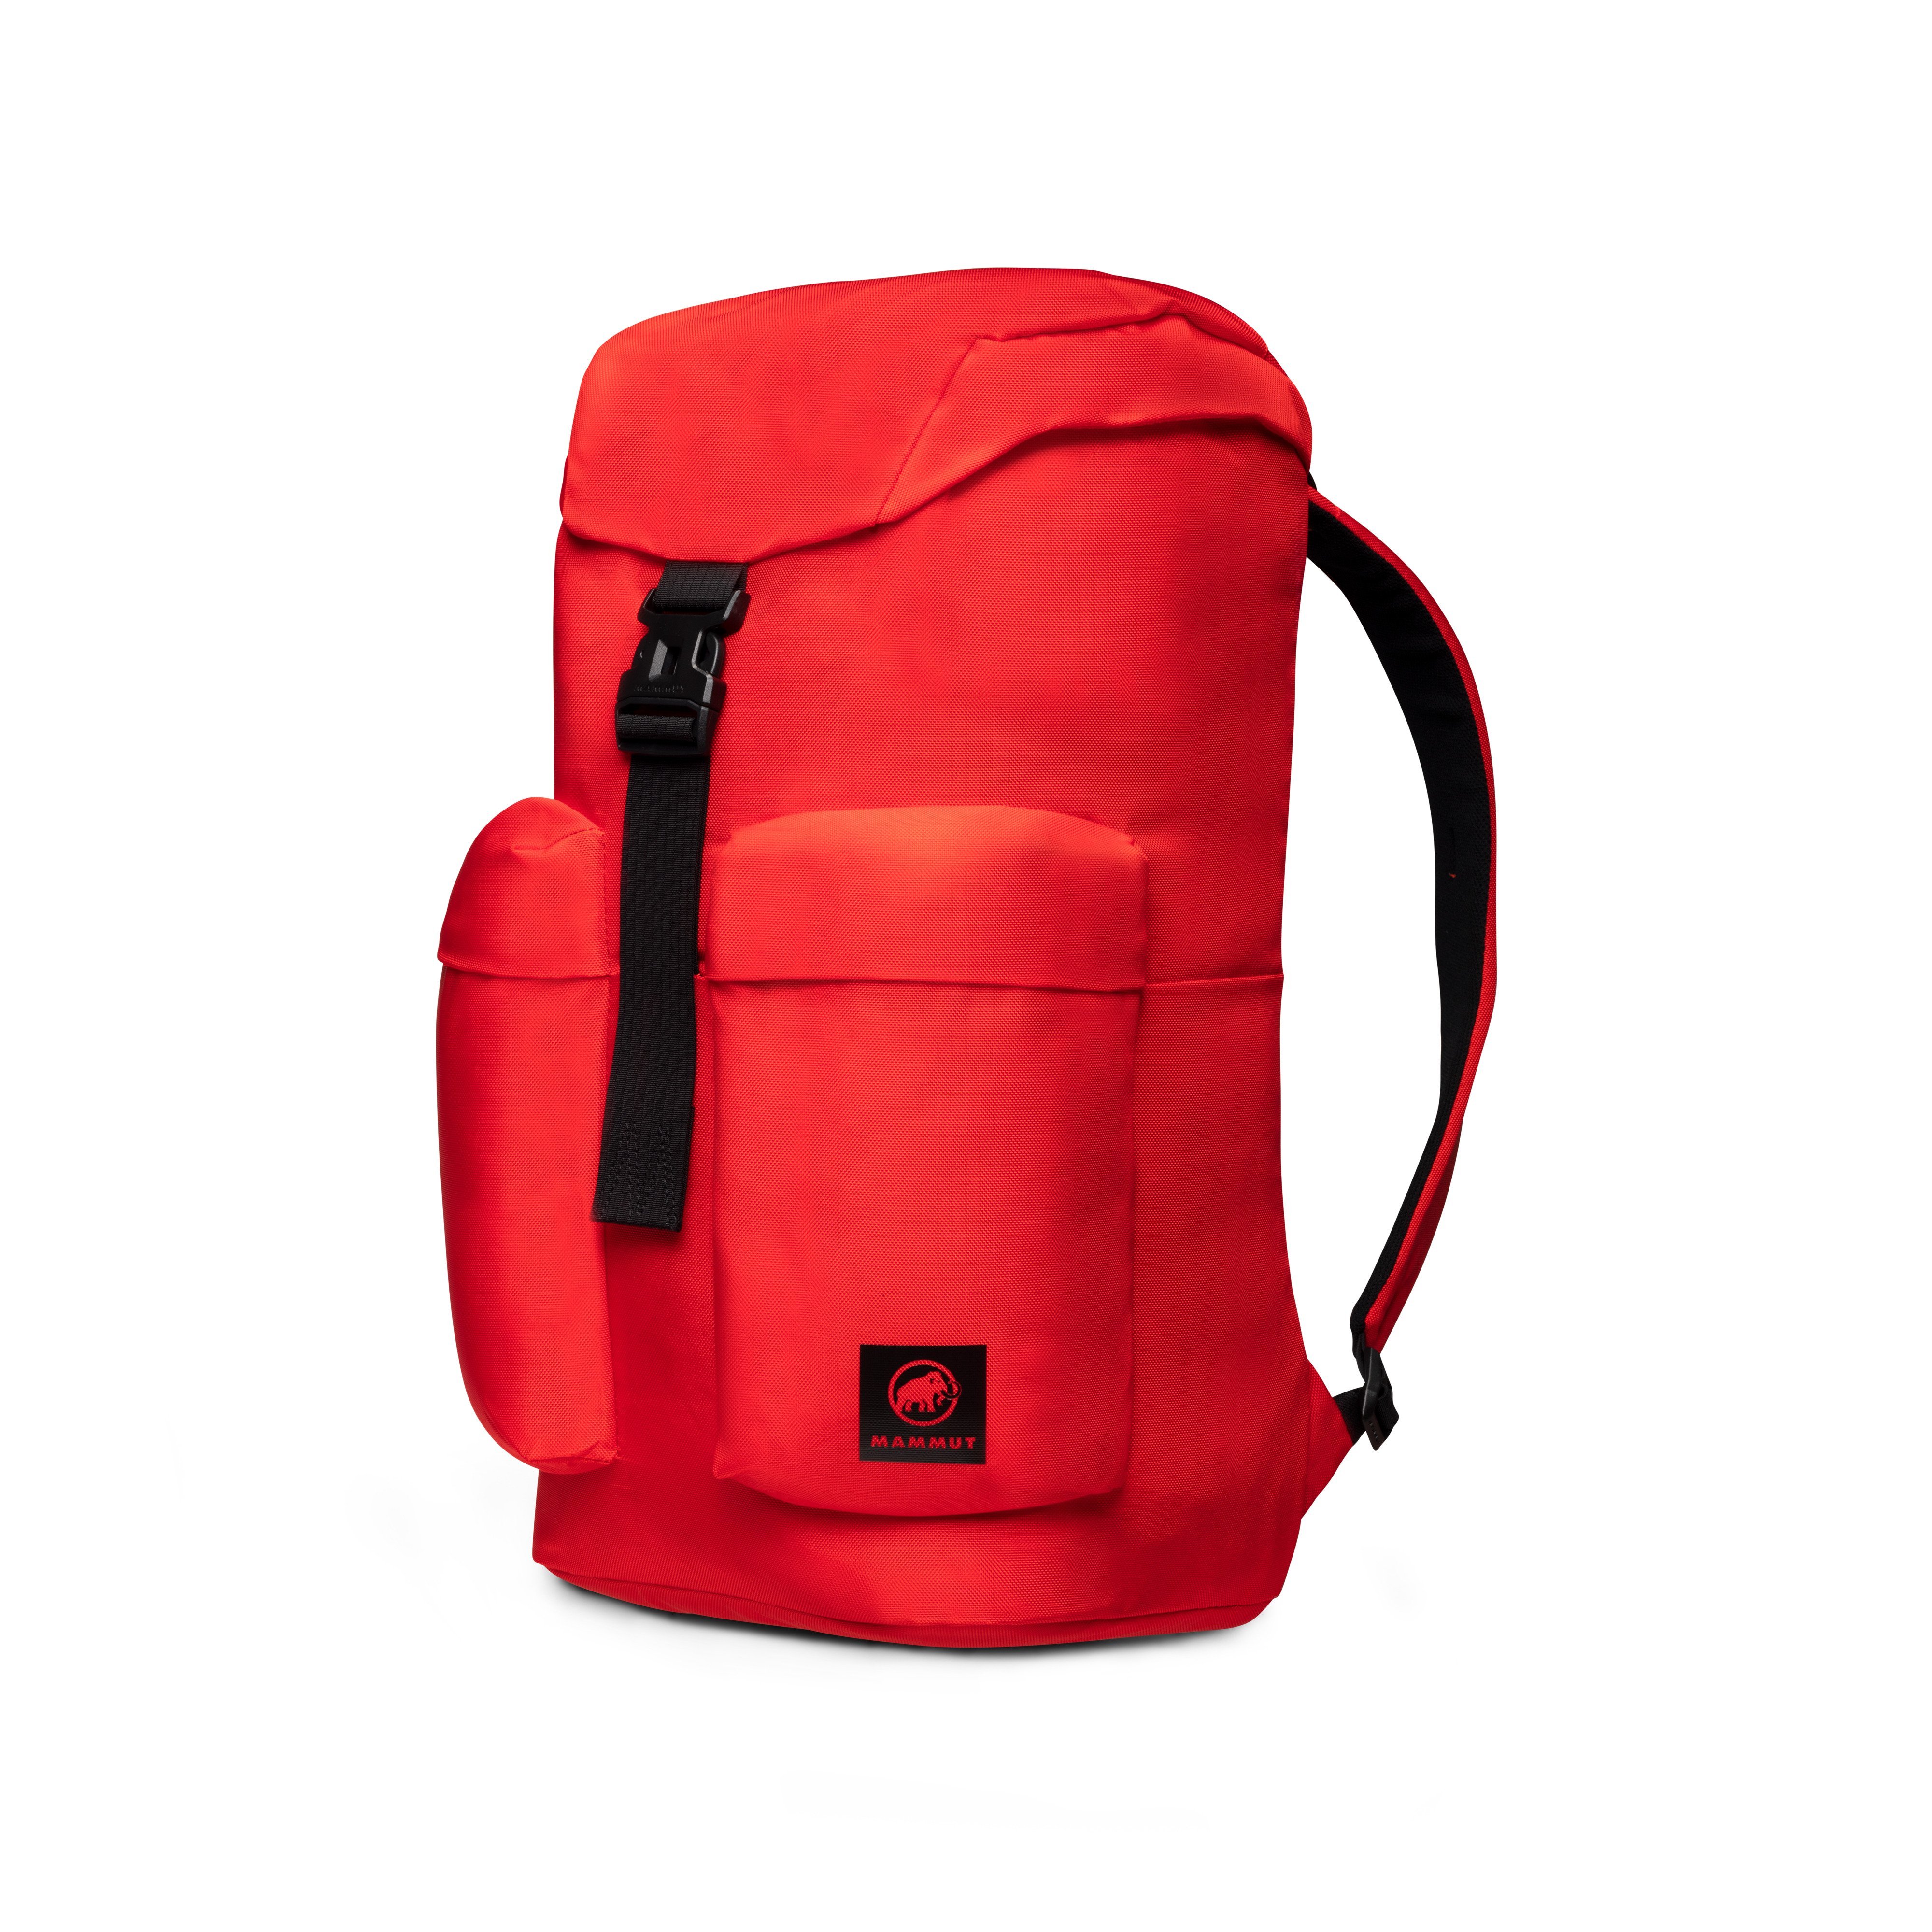 Xeron 30 - spicy, 30 L product image